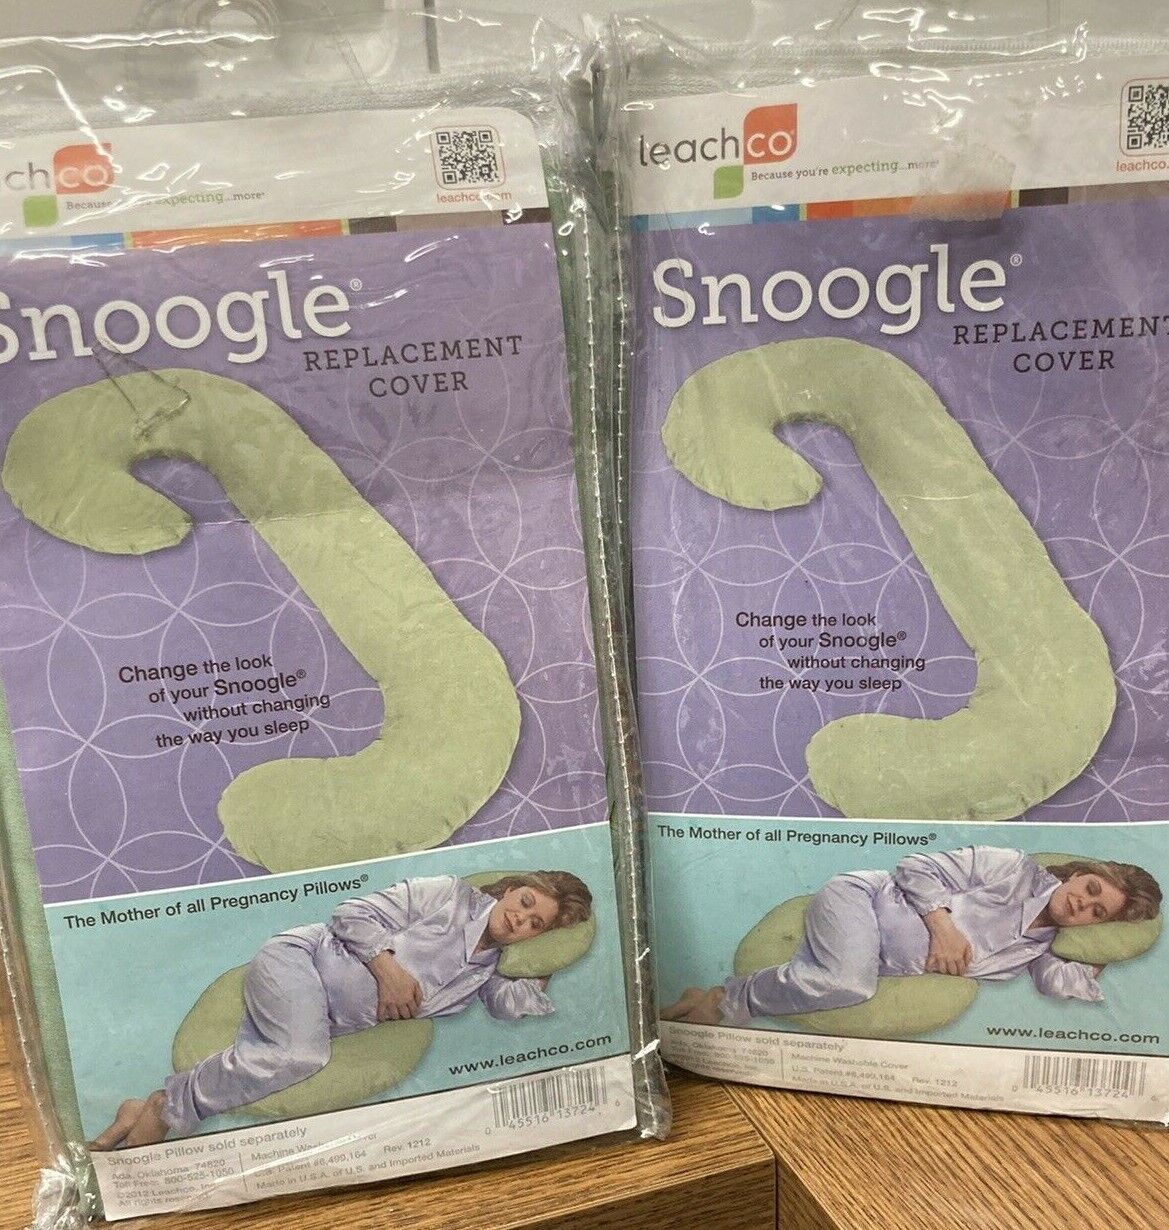 Lot of 2 Snoogle Pillow Covers - Pregnancy Sleeping Knee Maternity Expecting Mom Leachco